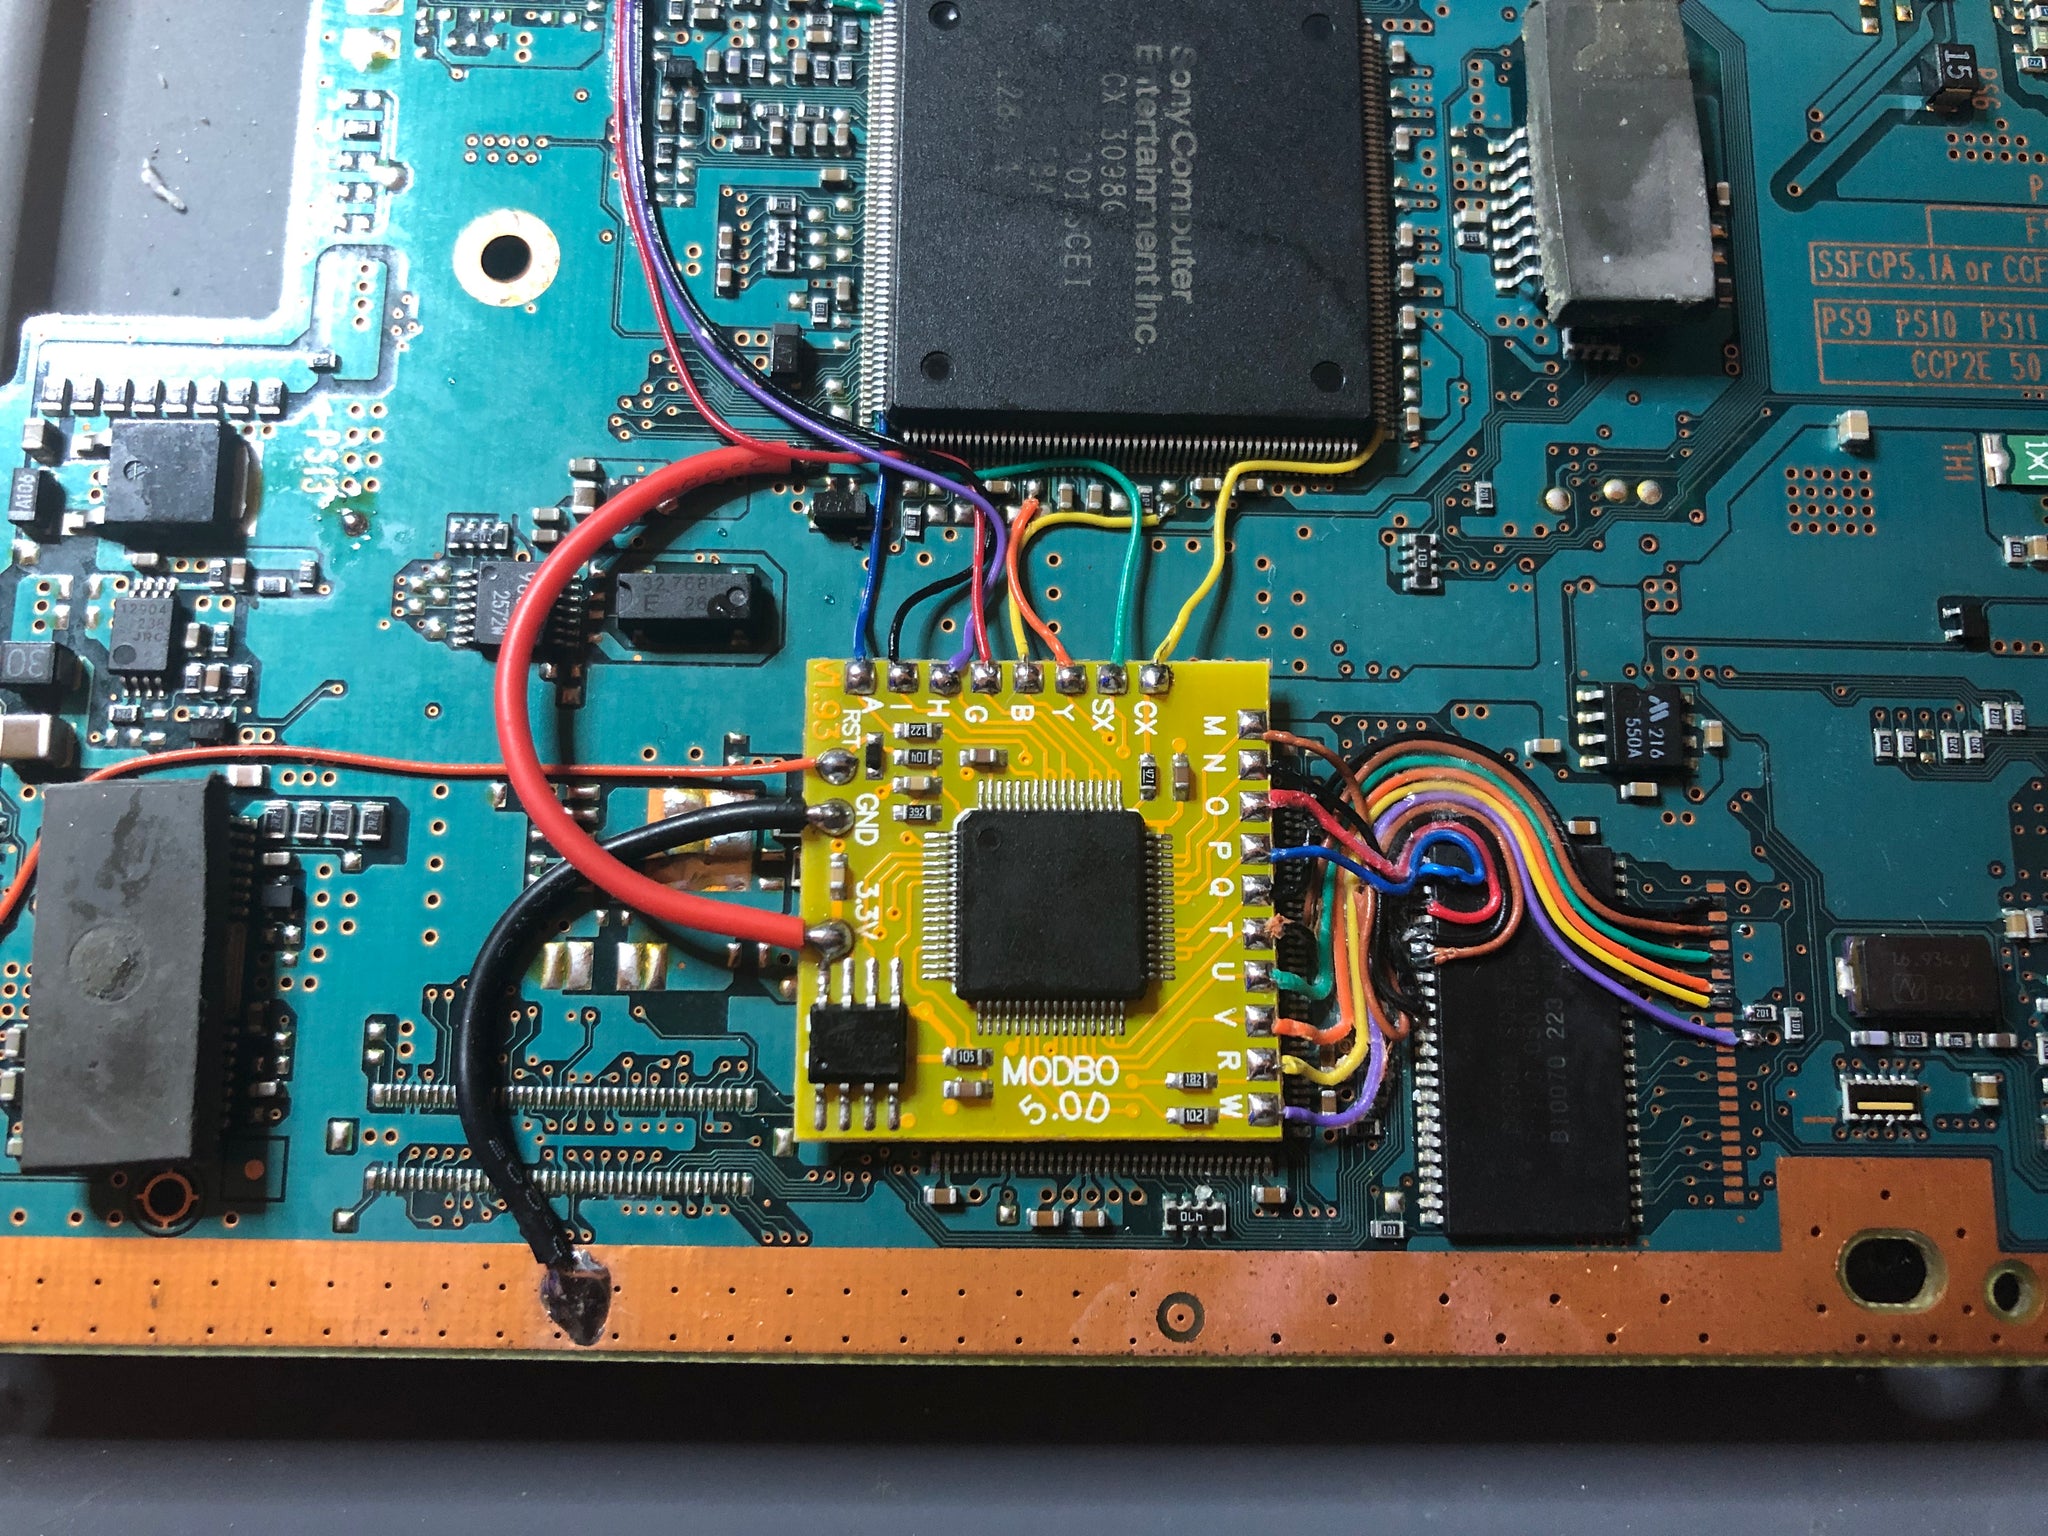 ps2 mod chip installed